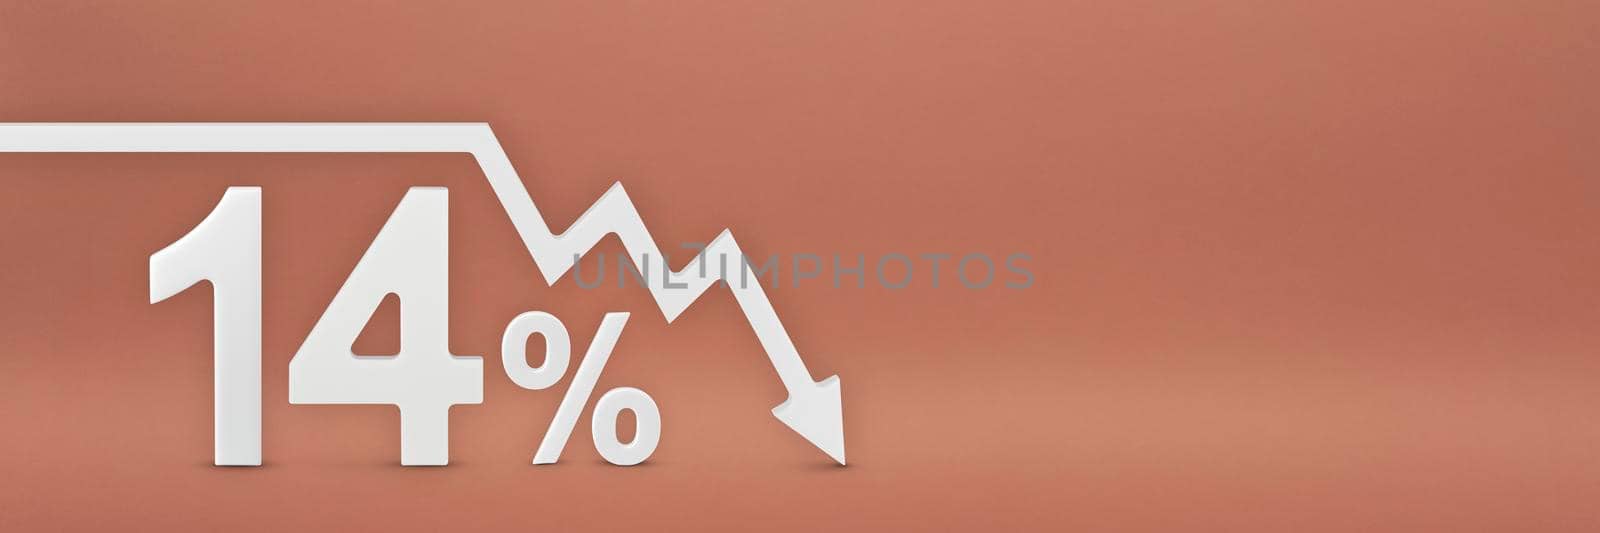 fourteen percent, the arrow on the graph is pointing down. Stock market crash, bear market, inflation. Economic collapse, collapse of stocks. 3d banner, 14 percent discount sign on a red background. by SERSOL